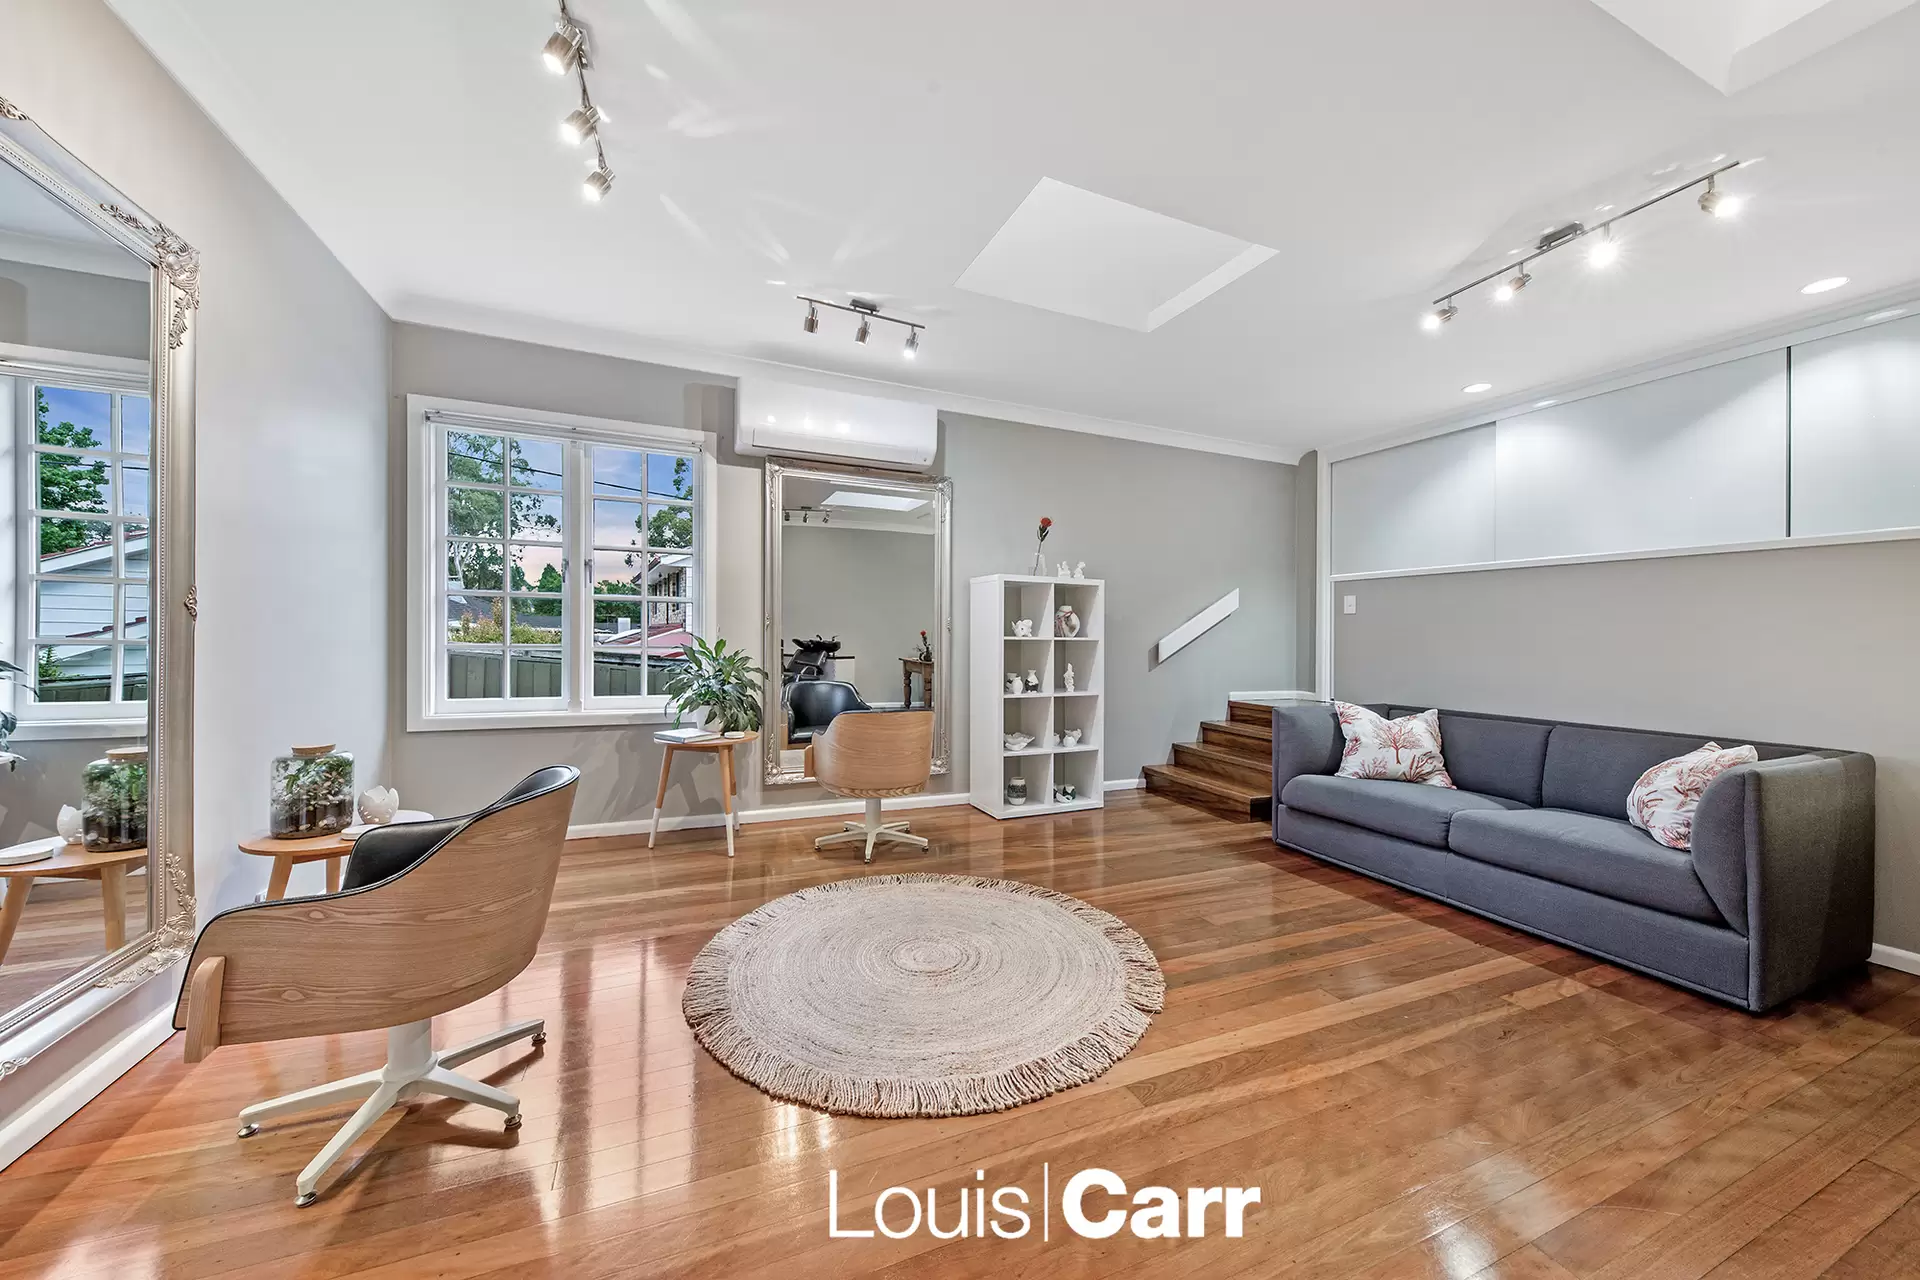 Photo #10: 47 Cambewarra Avenue, Castle Hill - For Sale by Louis Carr Real Estate